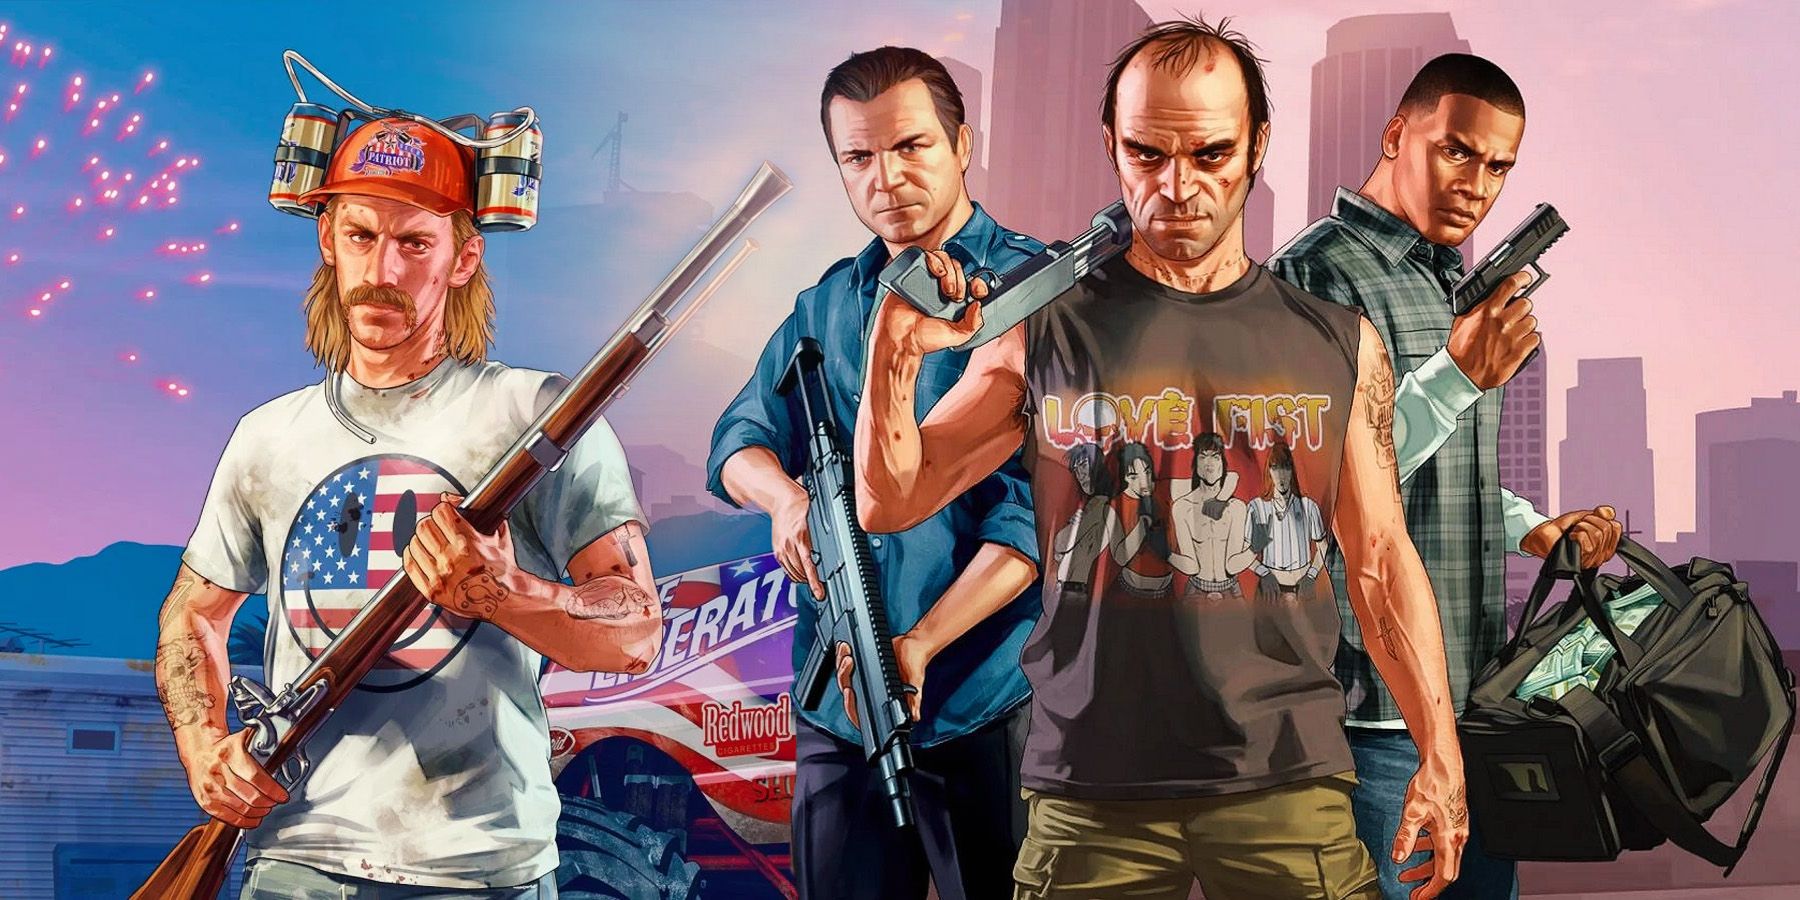 GTA 6 announcement, release date, and price: Leaks, rumors, and more